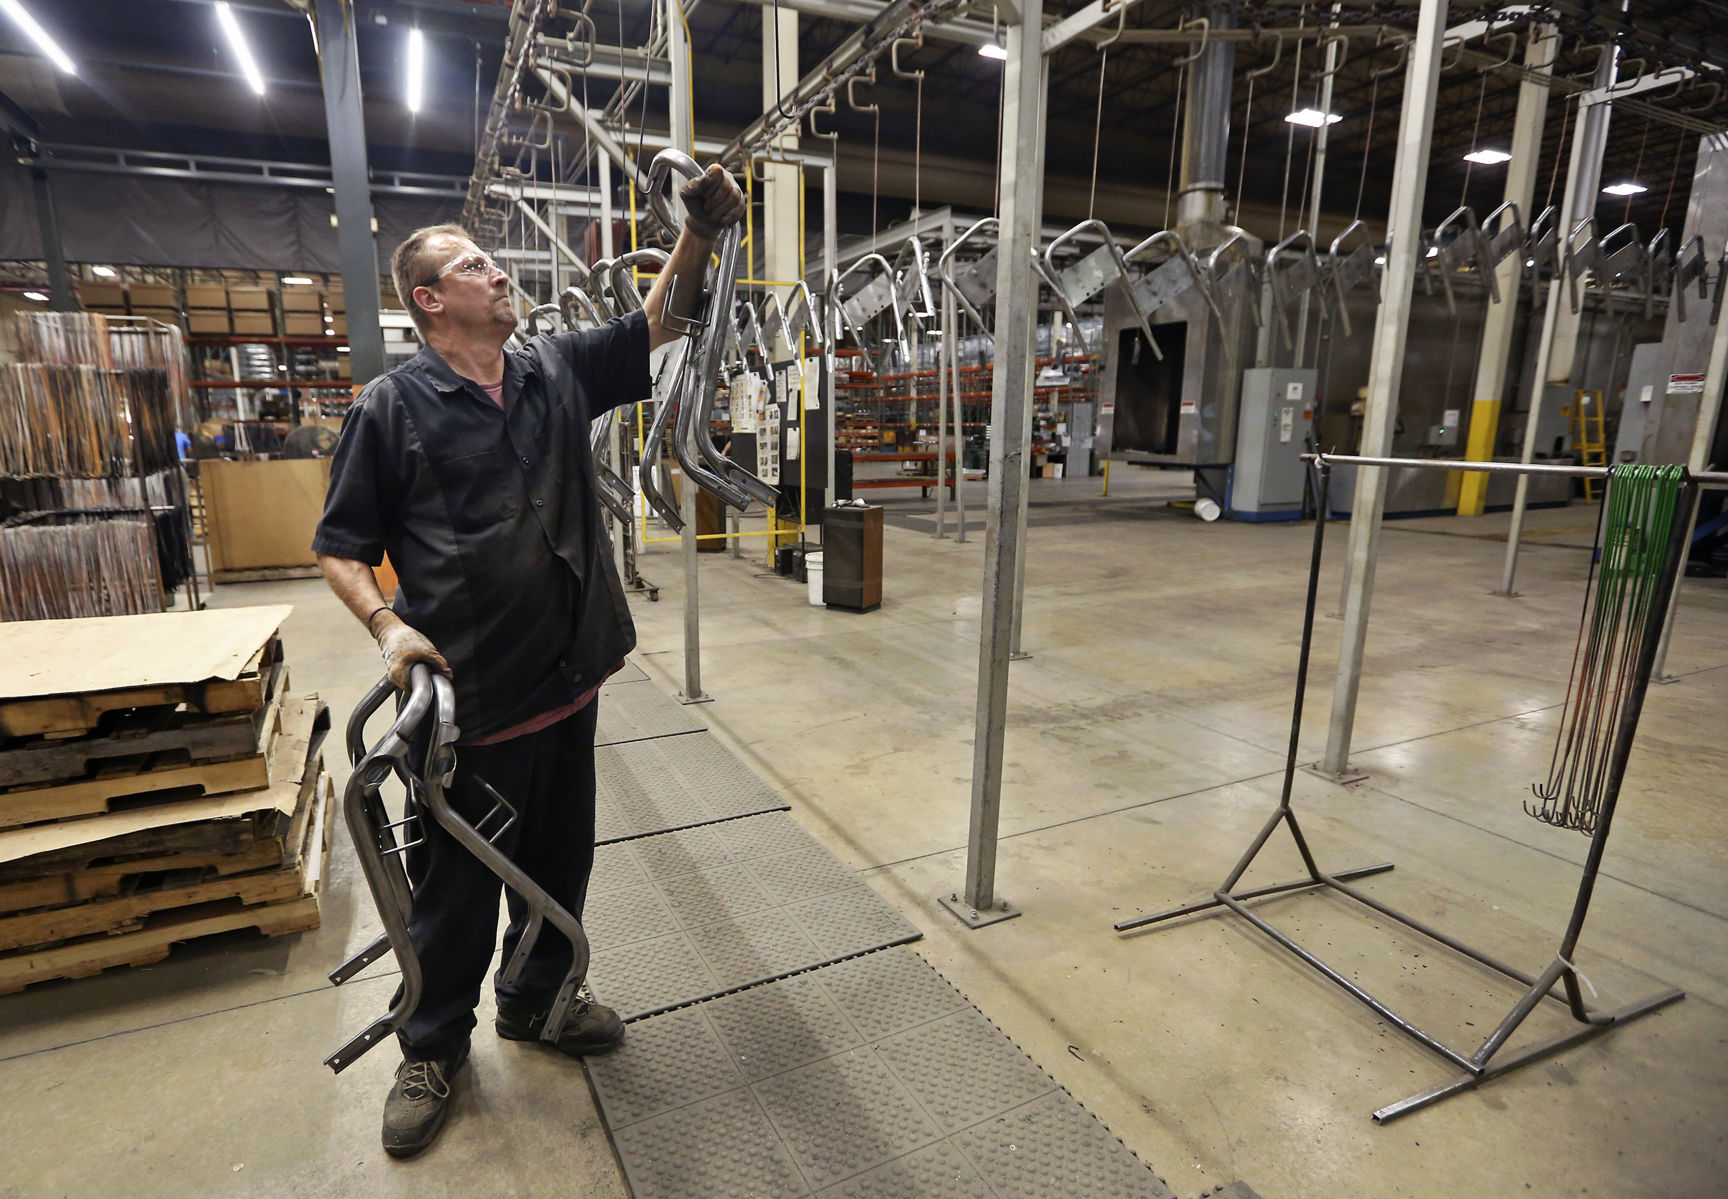 Mike Wienen hangs power washer handles to be painted at Mi-T-M Corporation in Peosta, Iowa, on Monday, June 24, 2019.    PHOTO CREDIT: NICKI KOHL